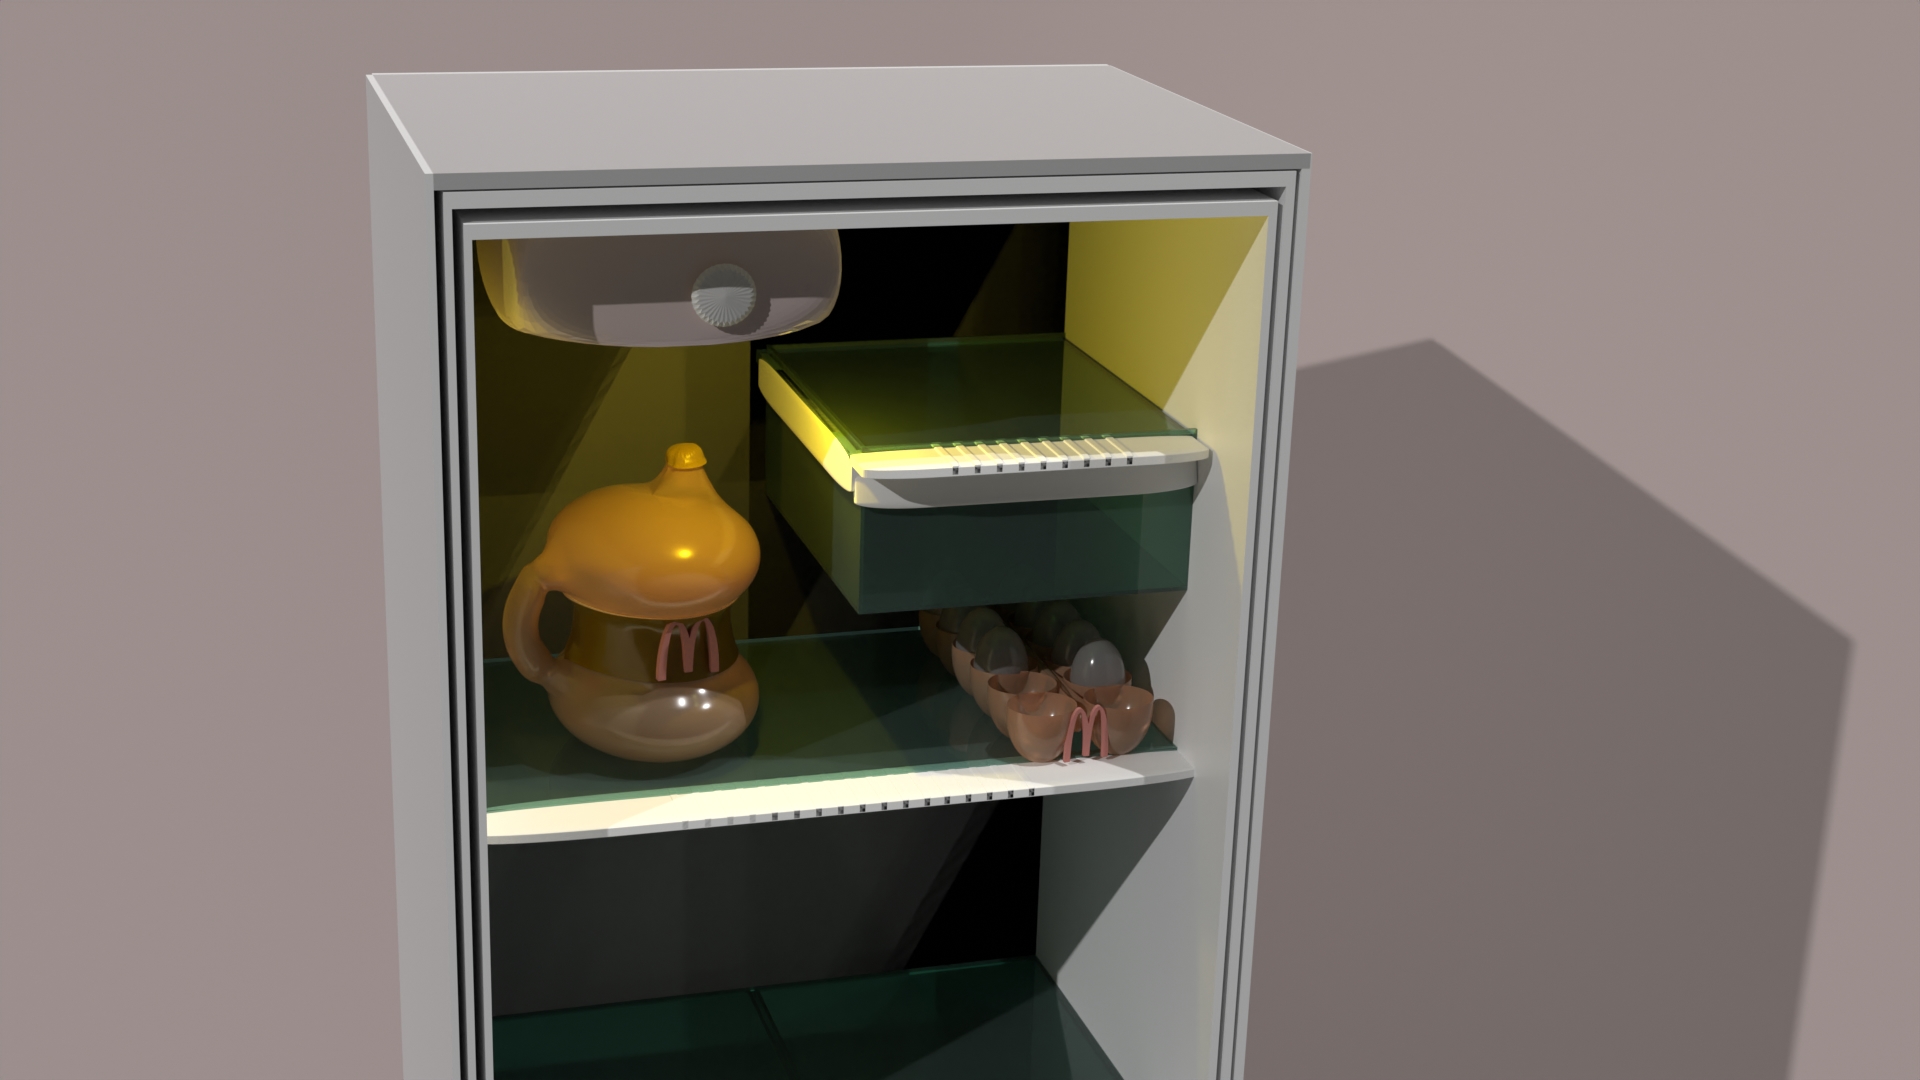 a 3d render of an interior of a fride featuring a dozen eggs from mcdonals and a gallon of mcdonalds brand milk. in a soft pink and blue colorway no mcdonalds colors